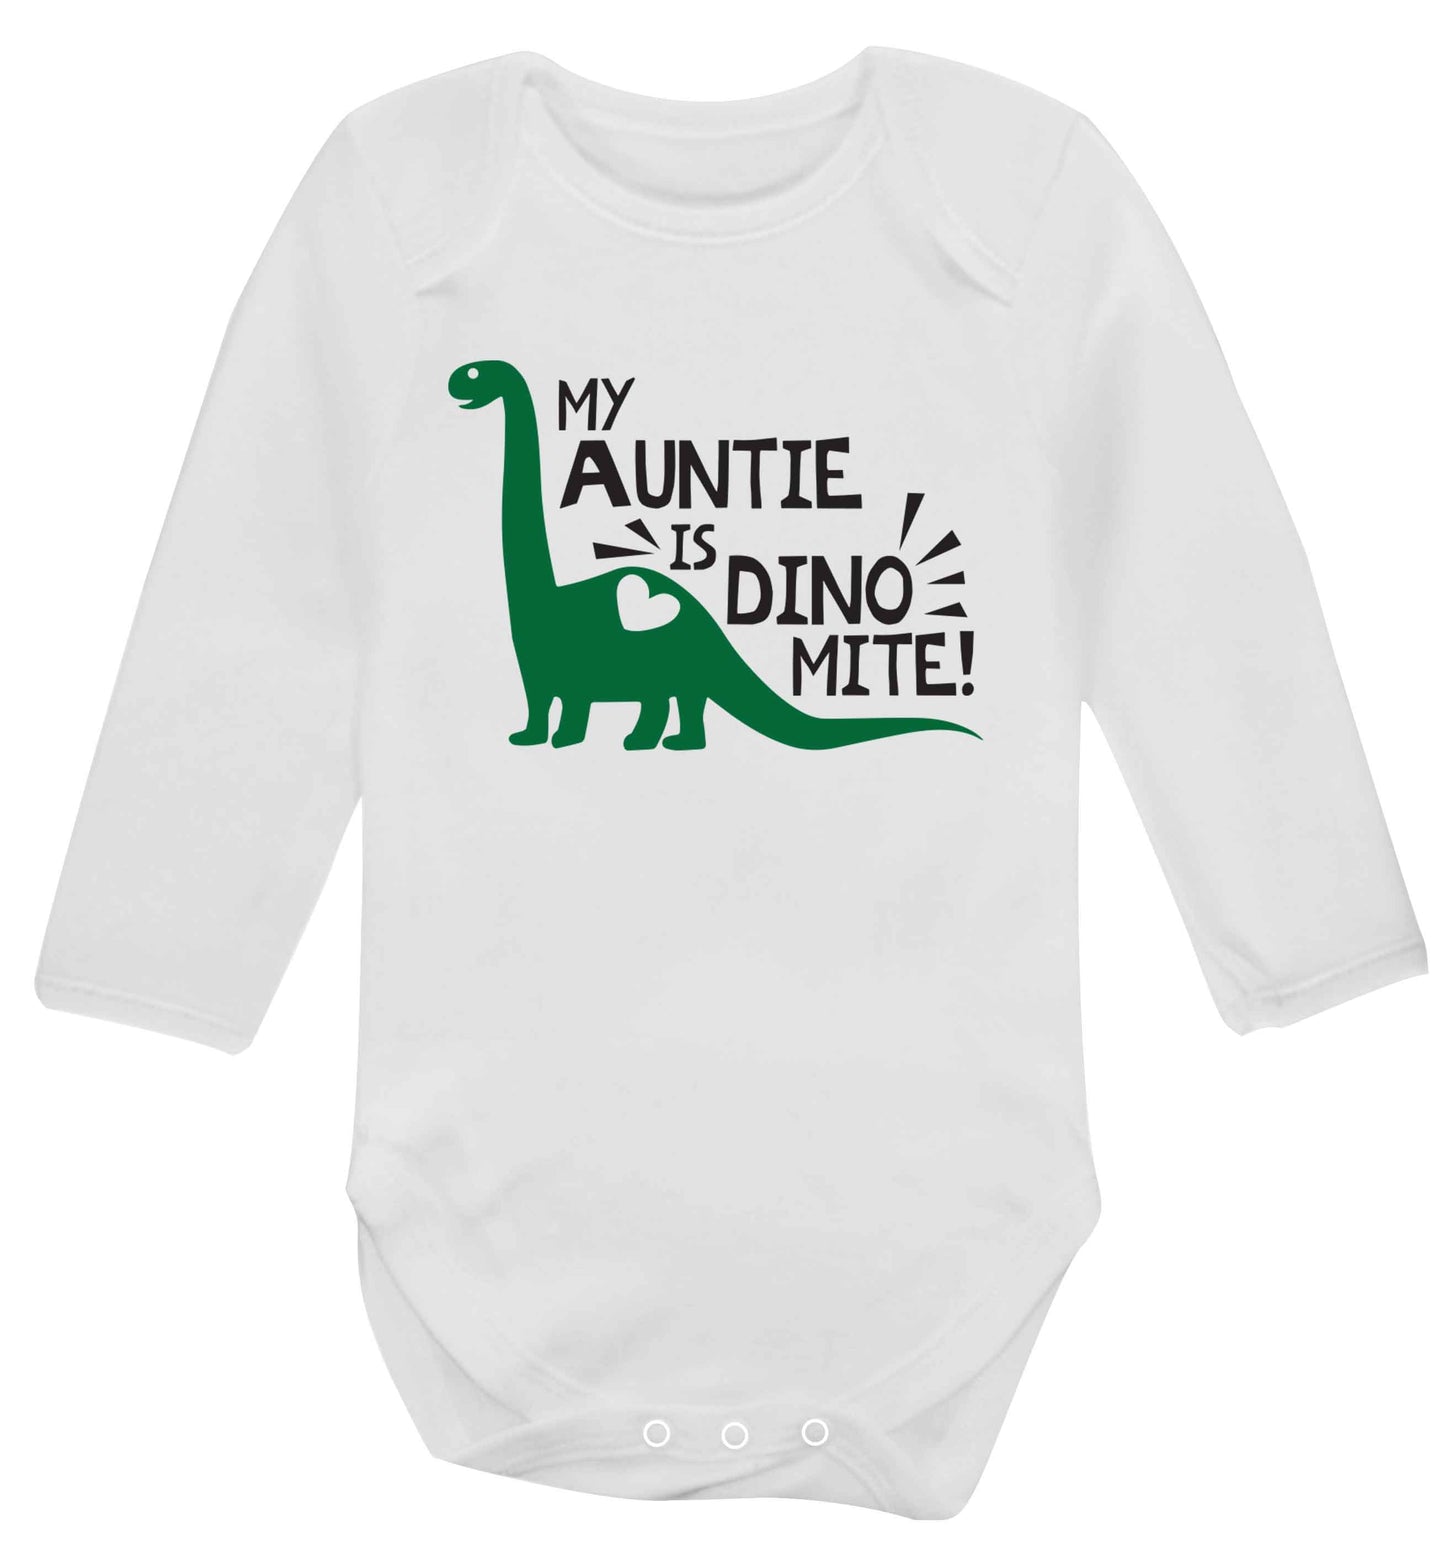 My auntie is dinomite! Baby Vest long sleeved white 6-12 months